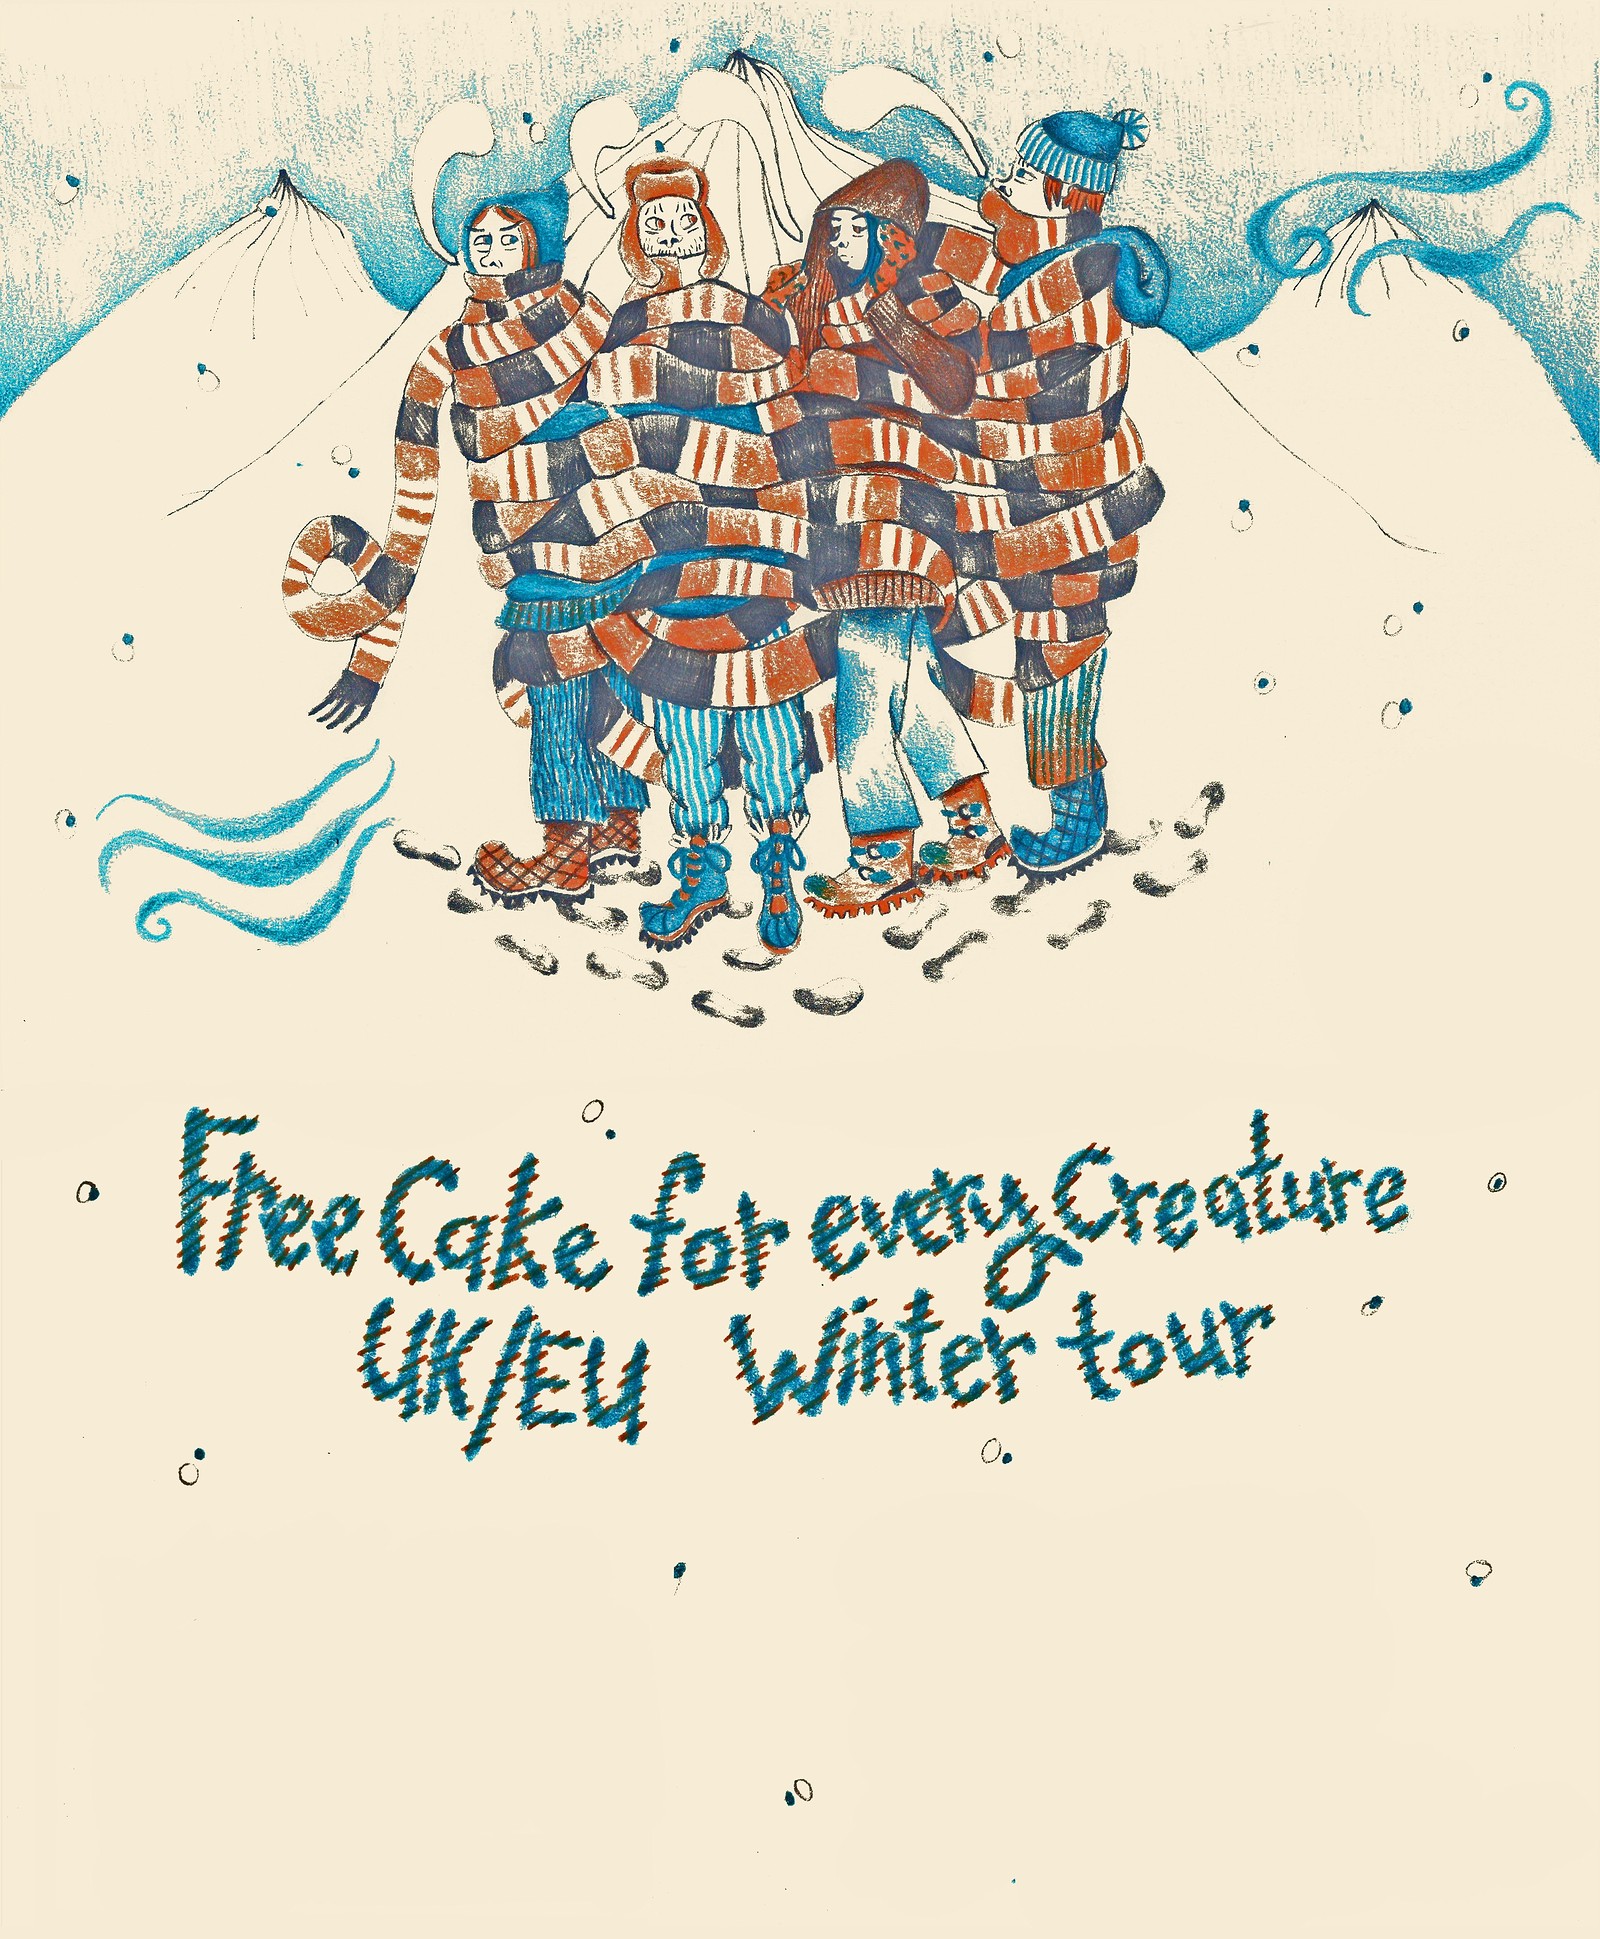 Free Cake For Every Creature & guests at Rough Trade Bristol